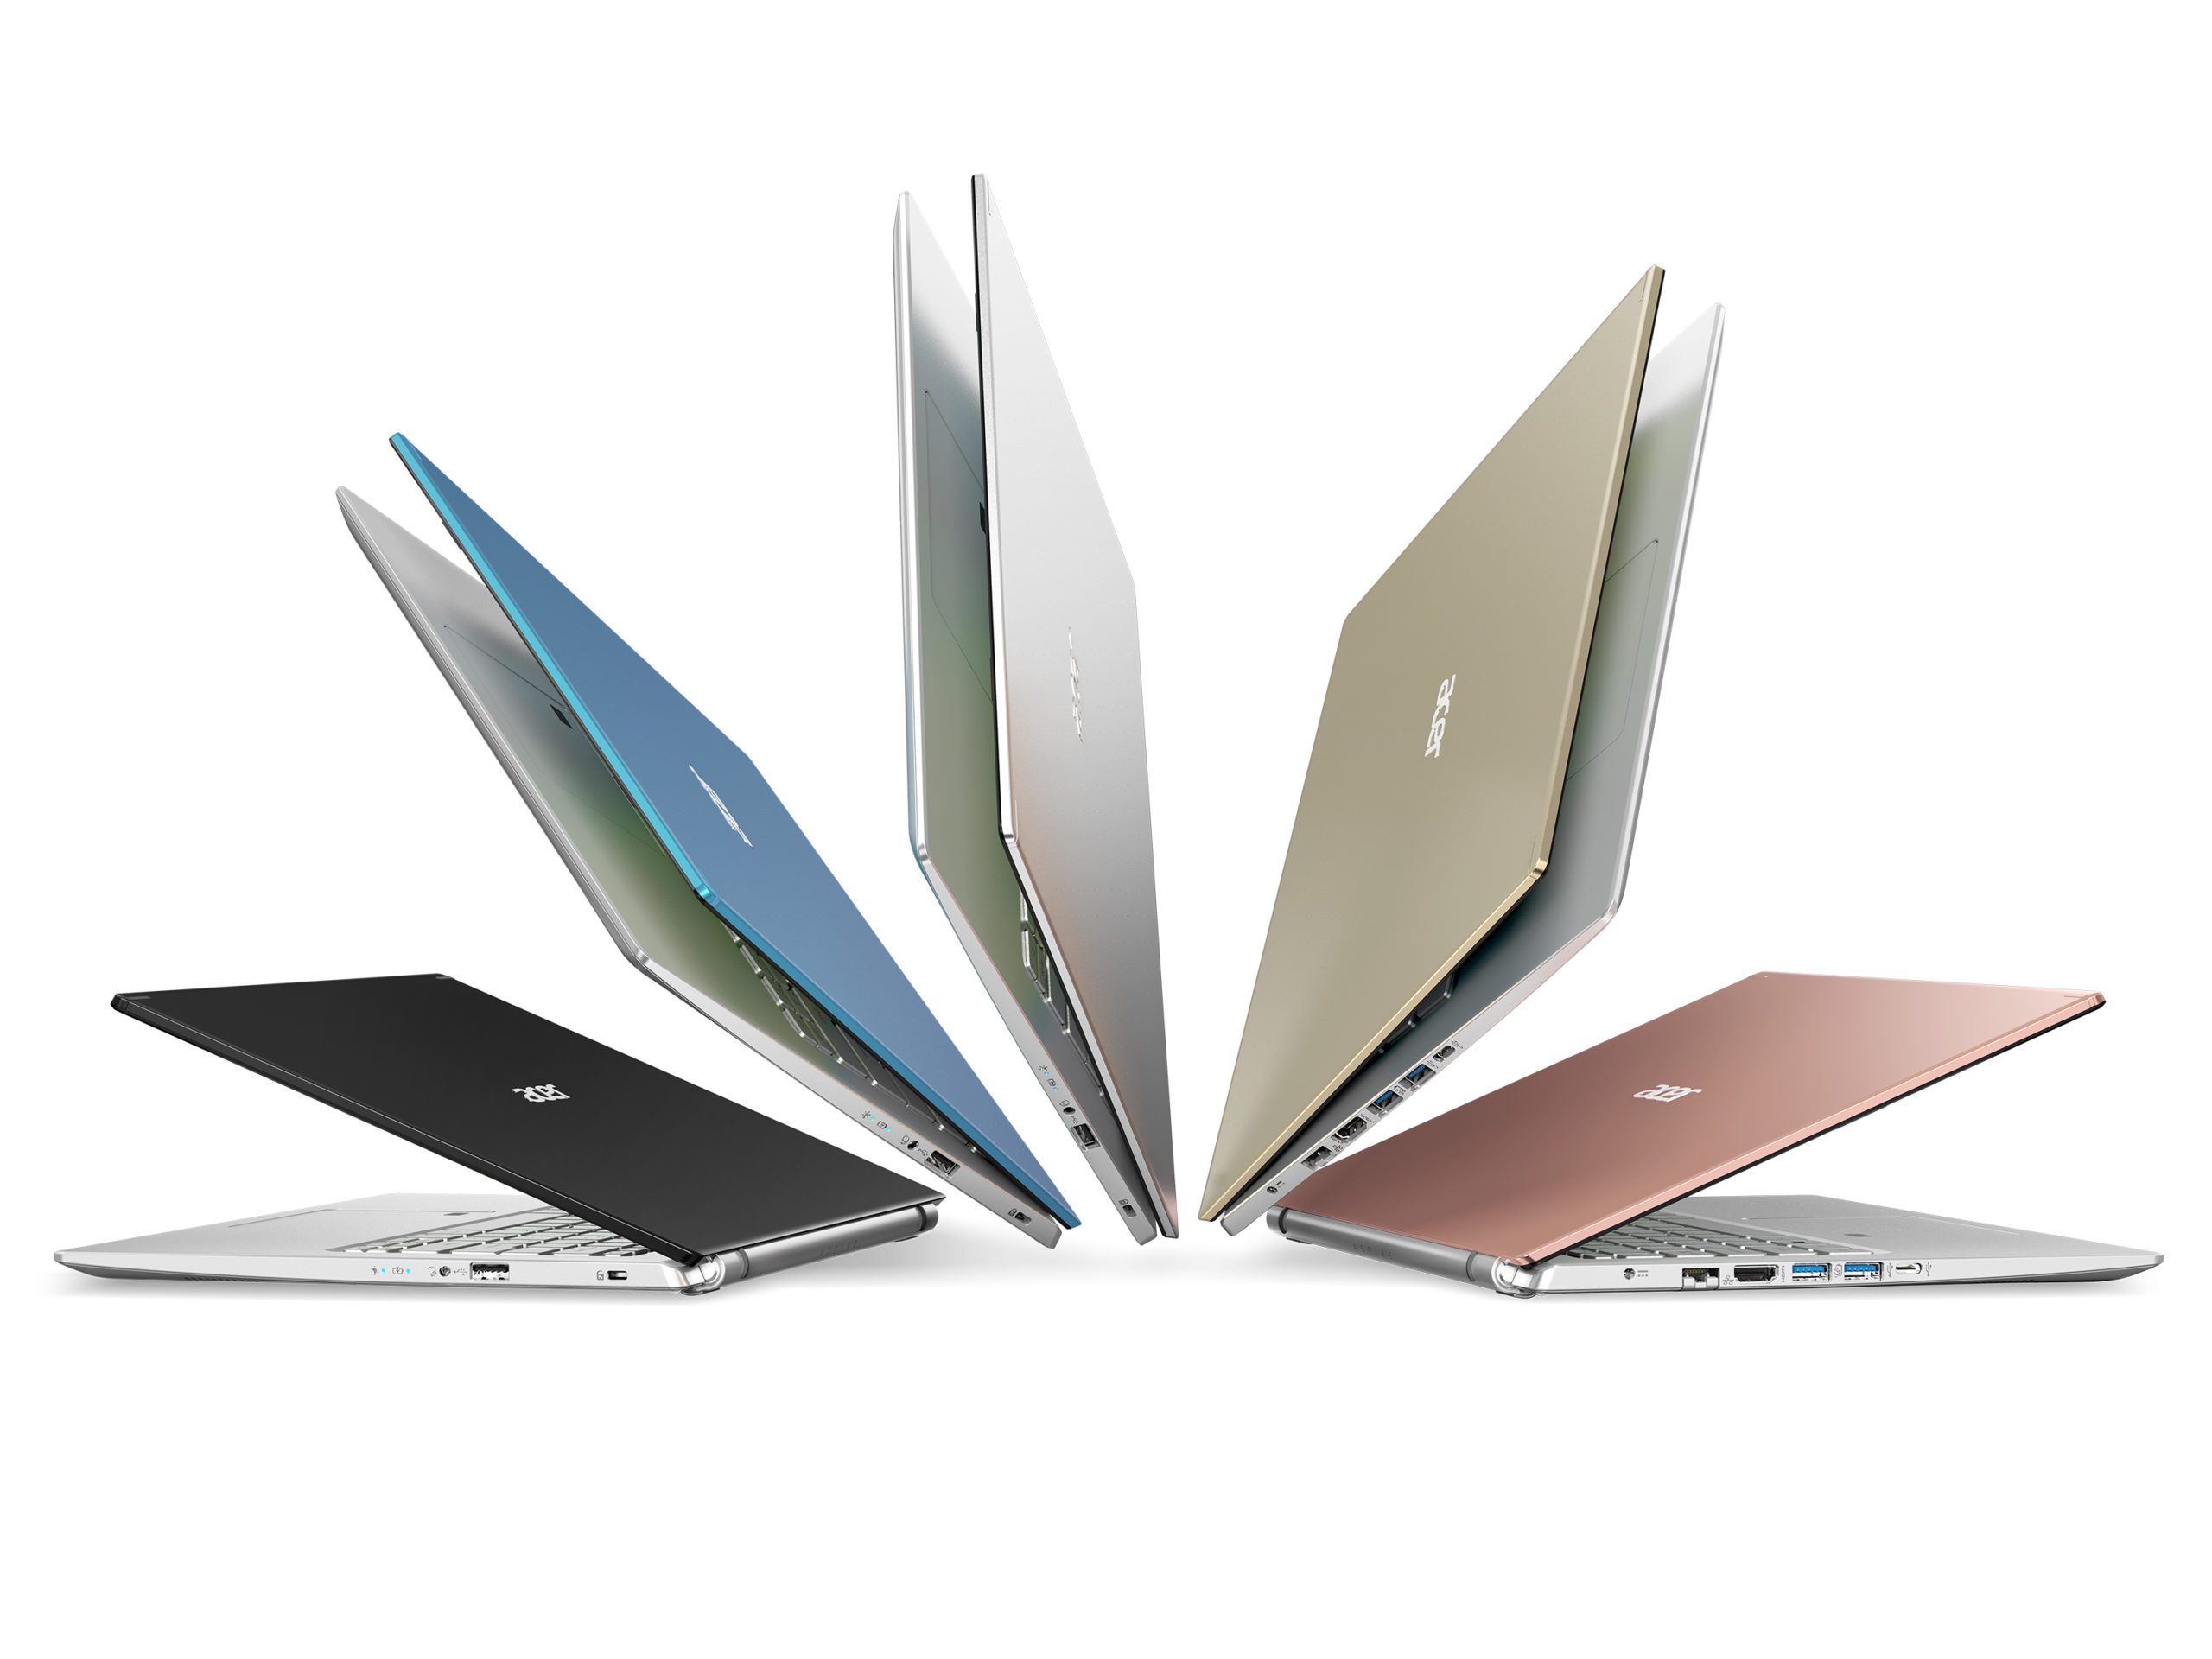 5 Acer Aspire 5 notebooks in various colors fanned out